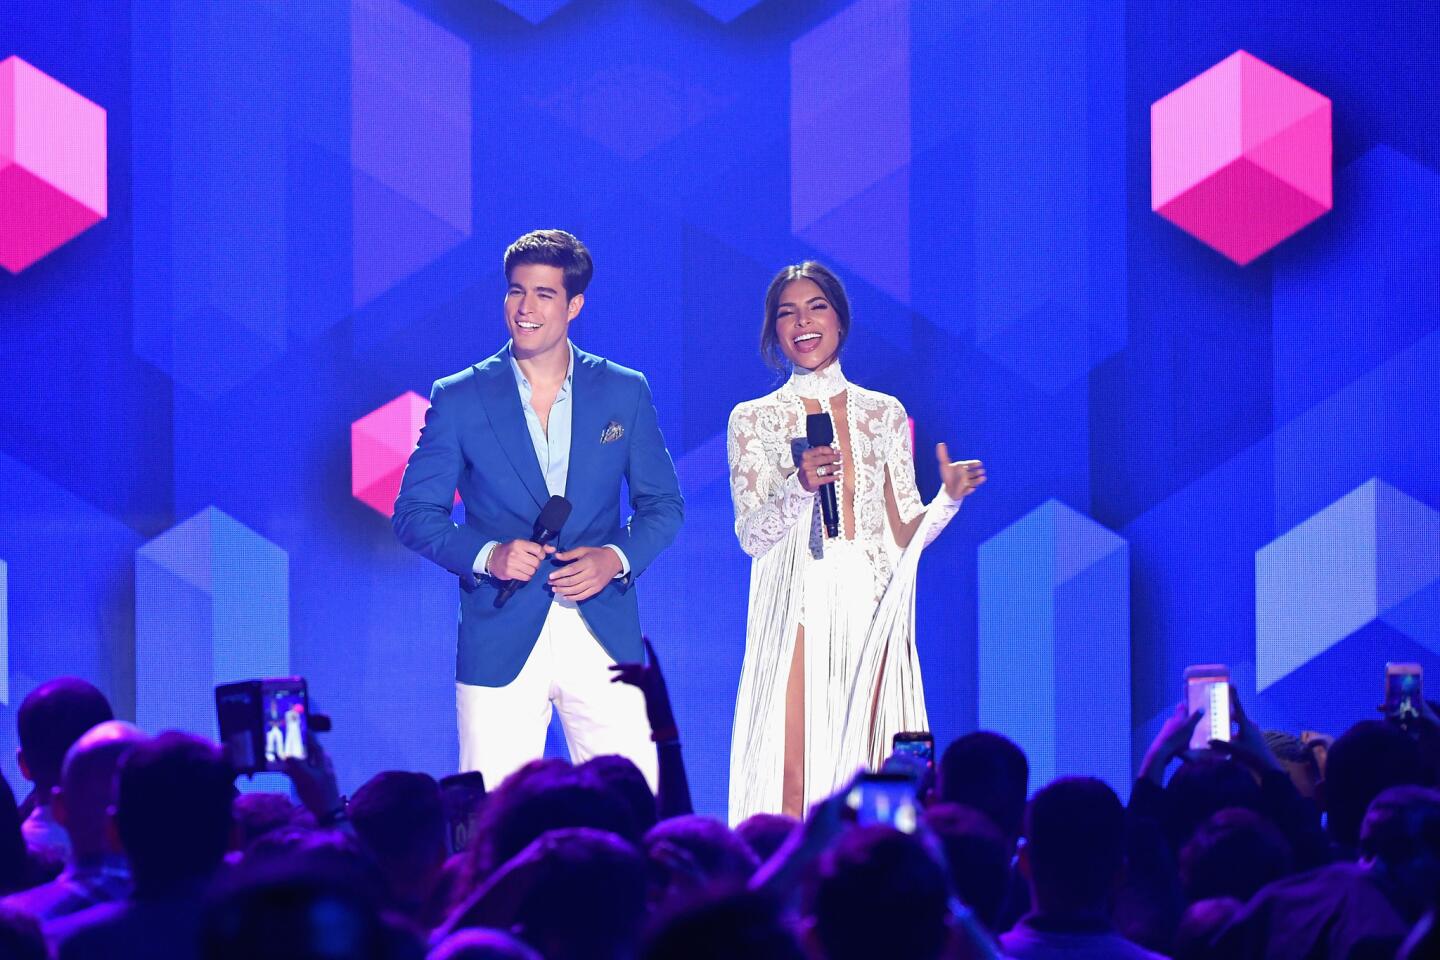 Univision's "Premios Juventud" 2017 Celebrates The Hottest Musical Artists And Young Latinos Change-Makers - Show